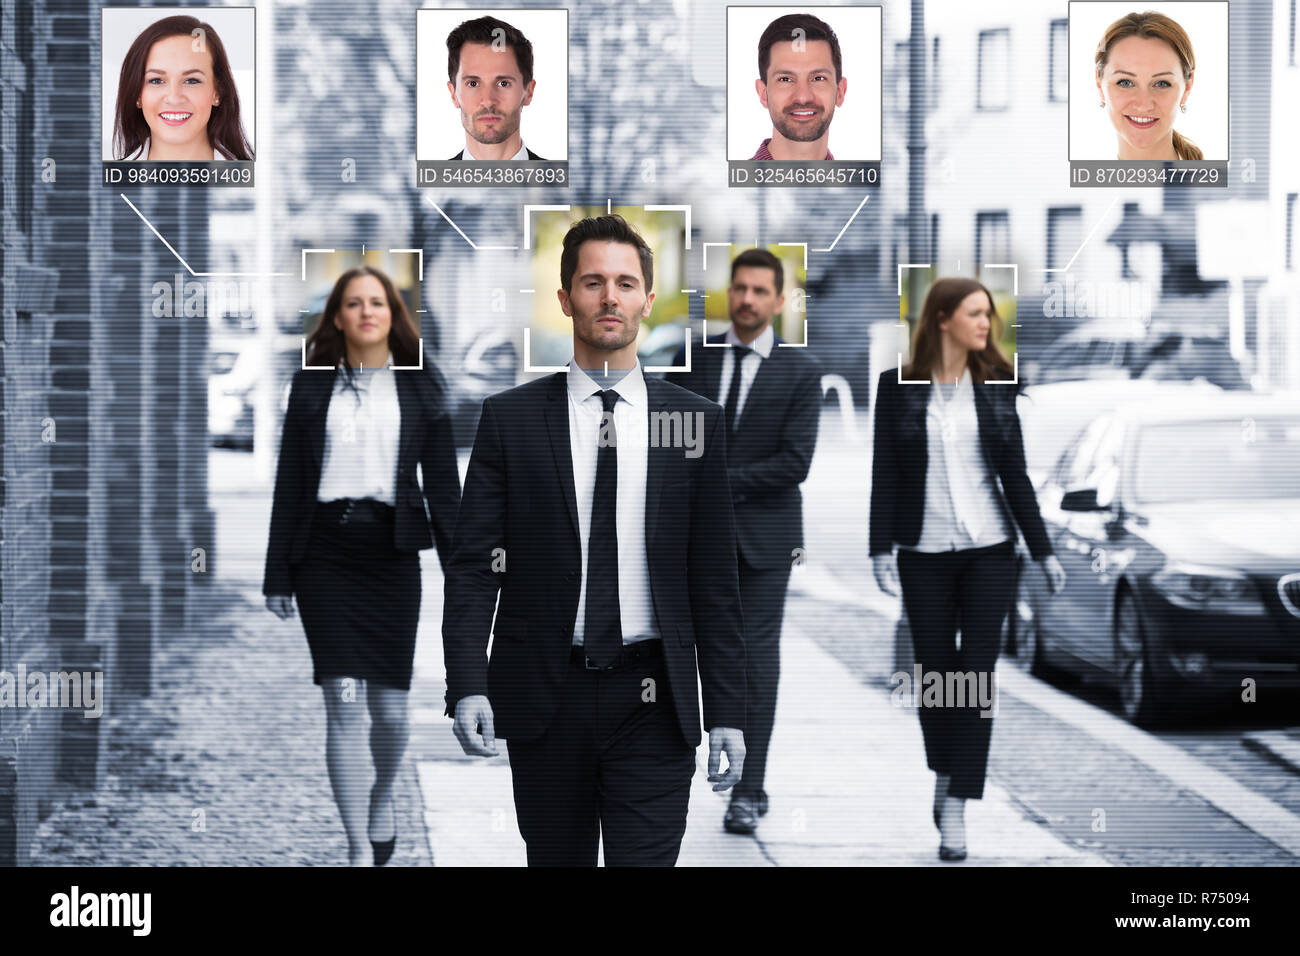 Businesspeople Face Recognized With Intellectual Learning System Stock Photo